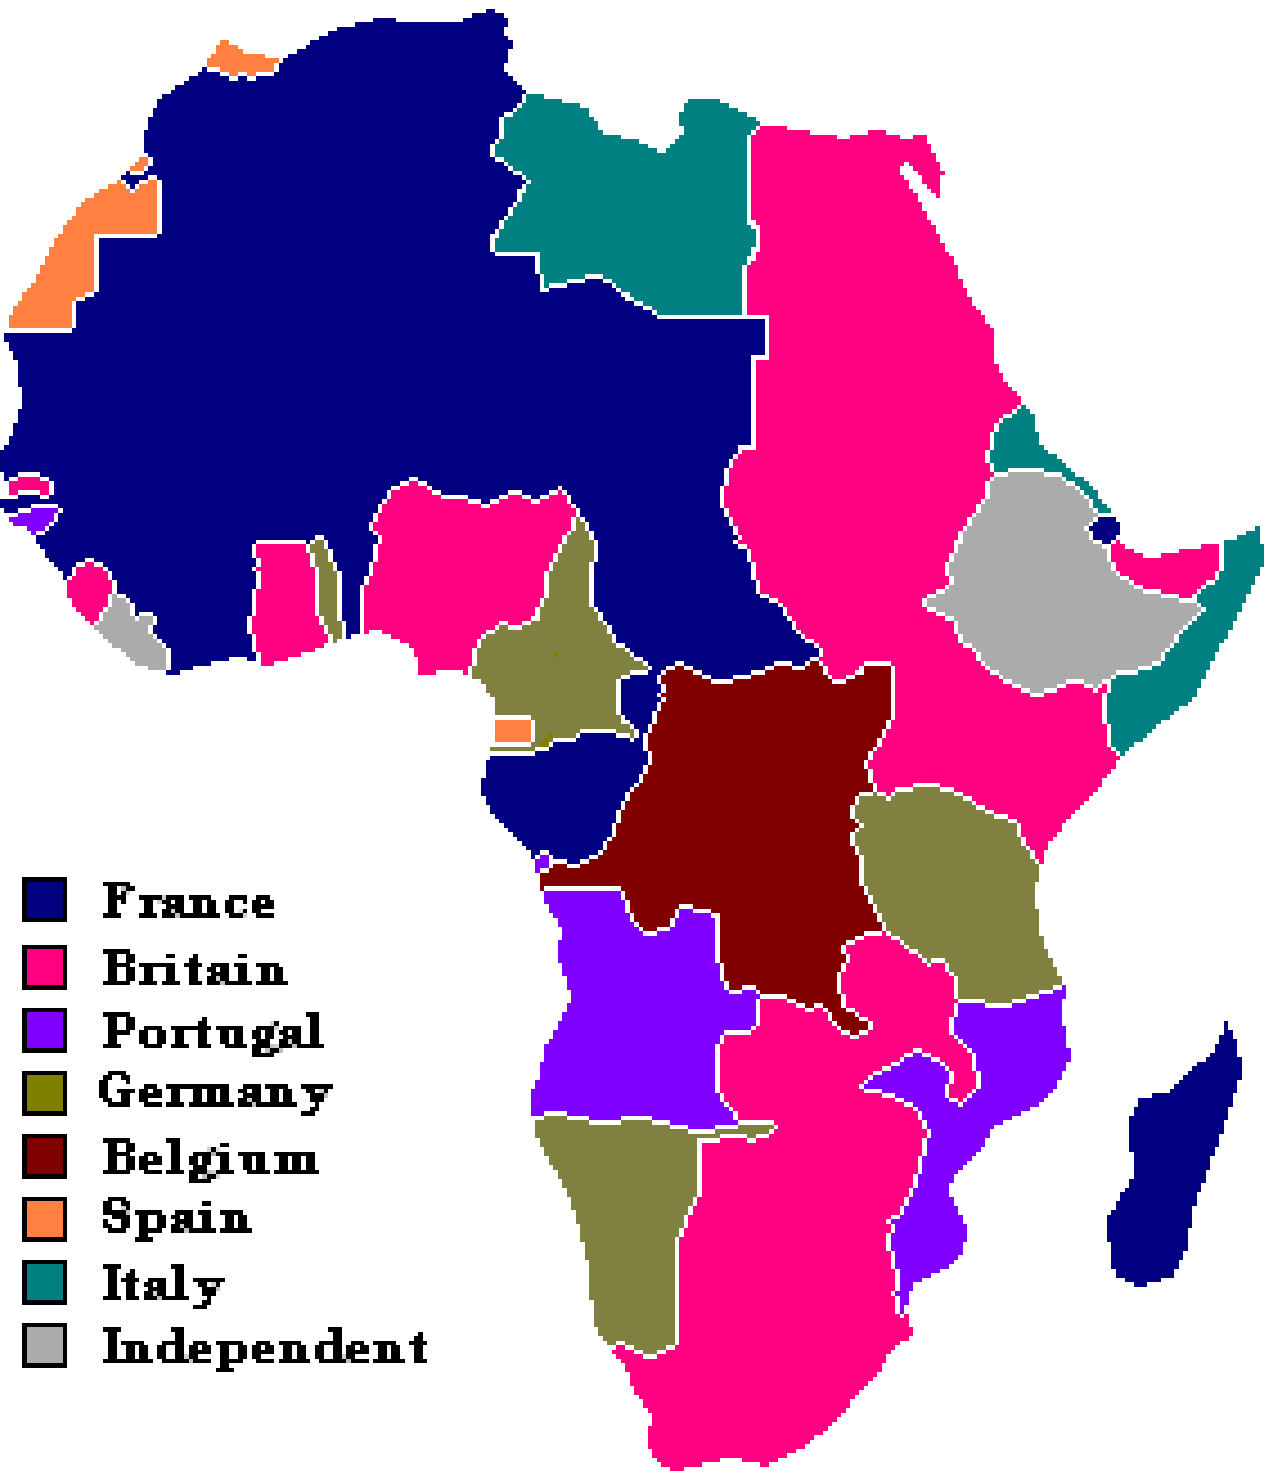 Africa and colonialism